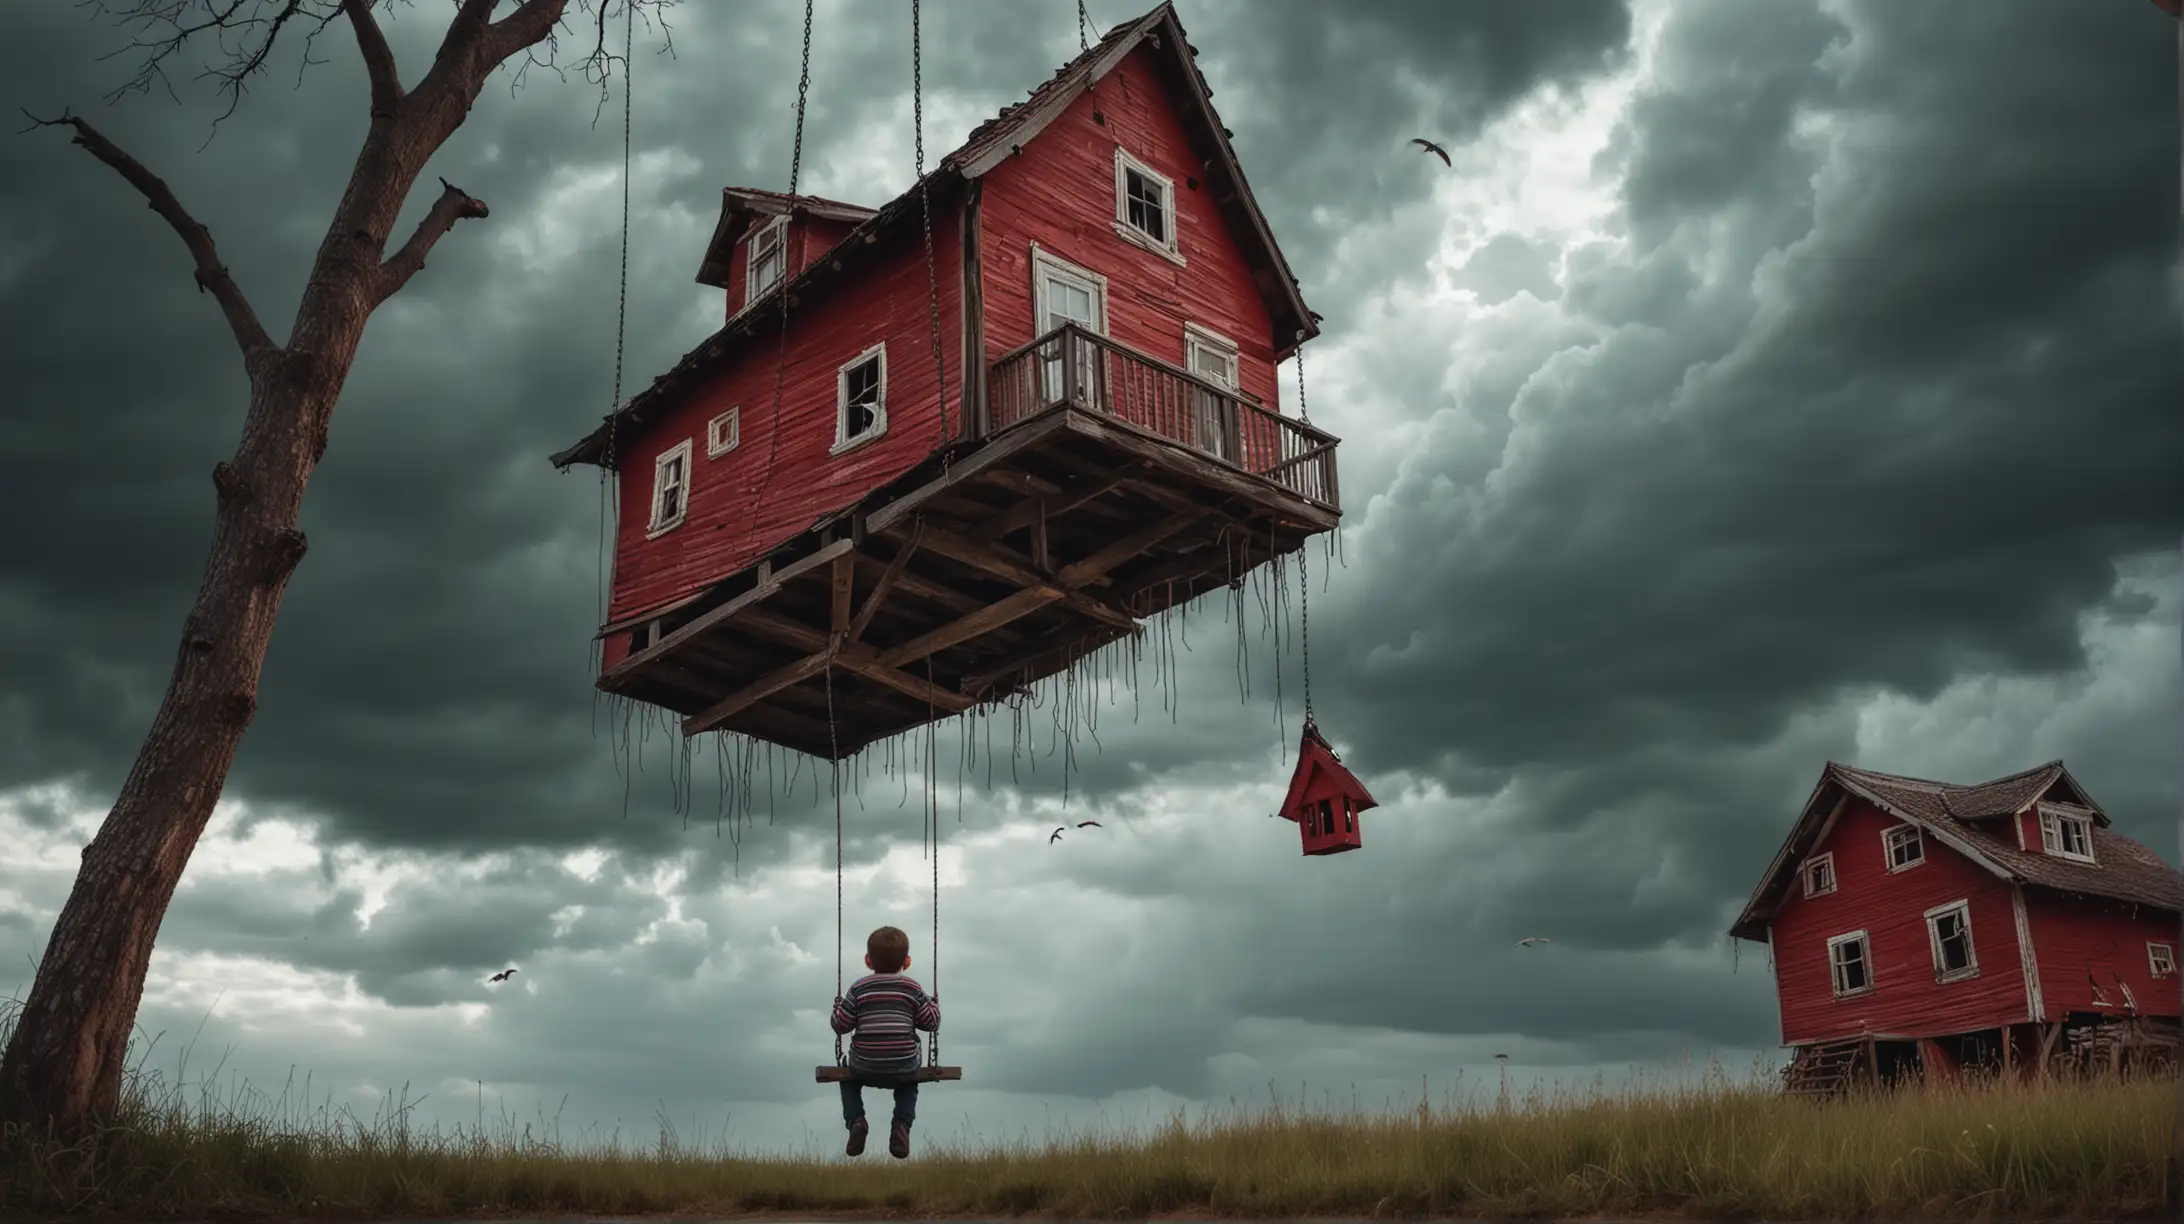 Child Swinging Beneath Ominous Red Sky Haunting Imagery of Fear